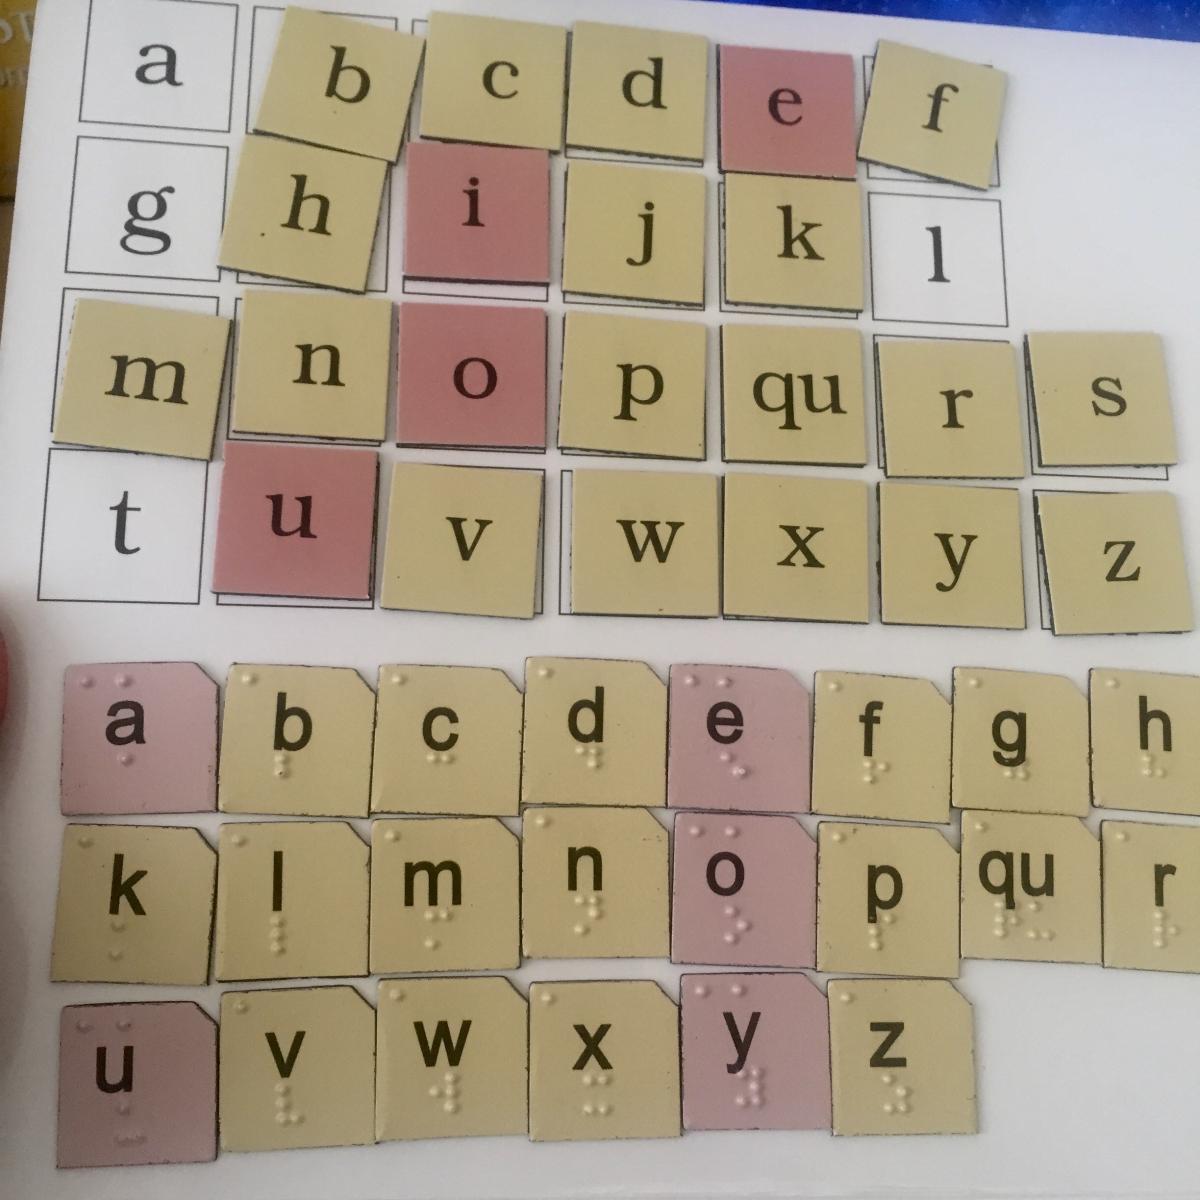 9 by 12 thin board with print alphabet tiles and also print plus braille alphabet tiles